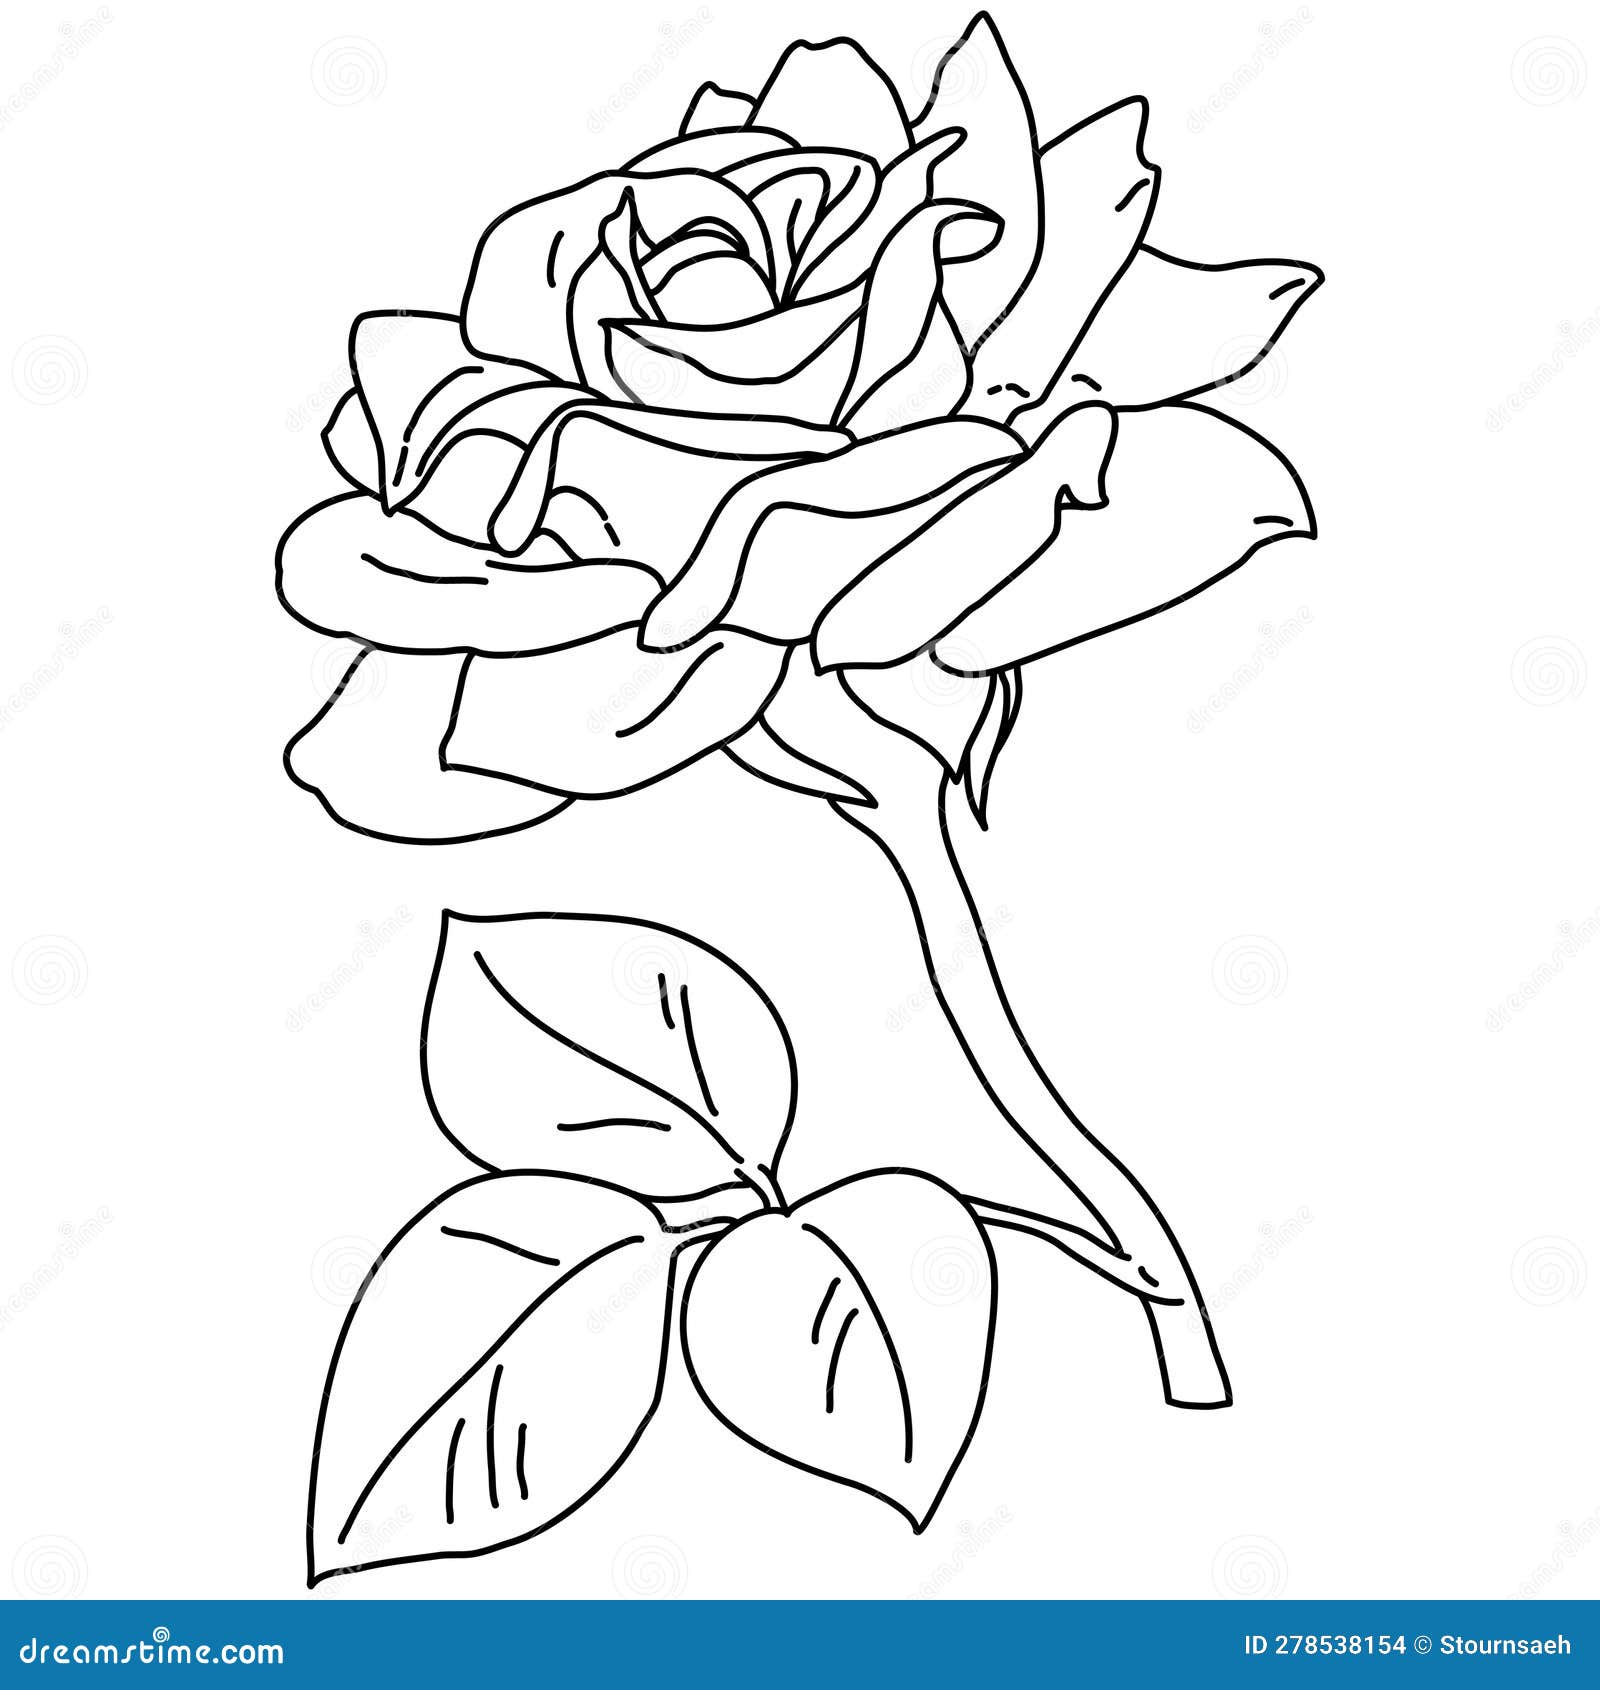 Rose Flower in Bloom on Stem with Leaf Line Art. Hand Drawn Realistic ...